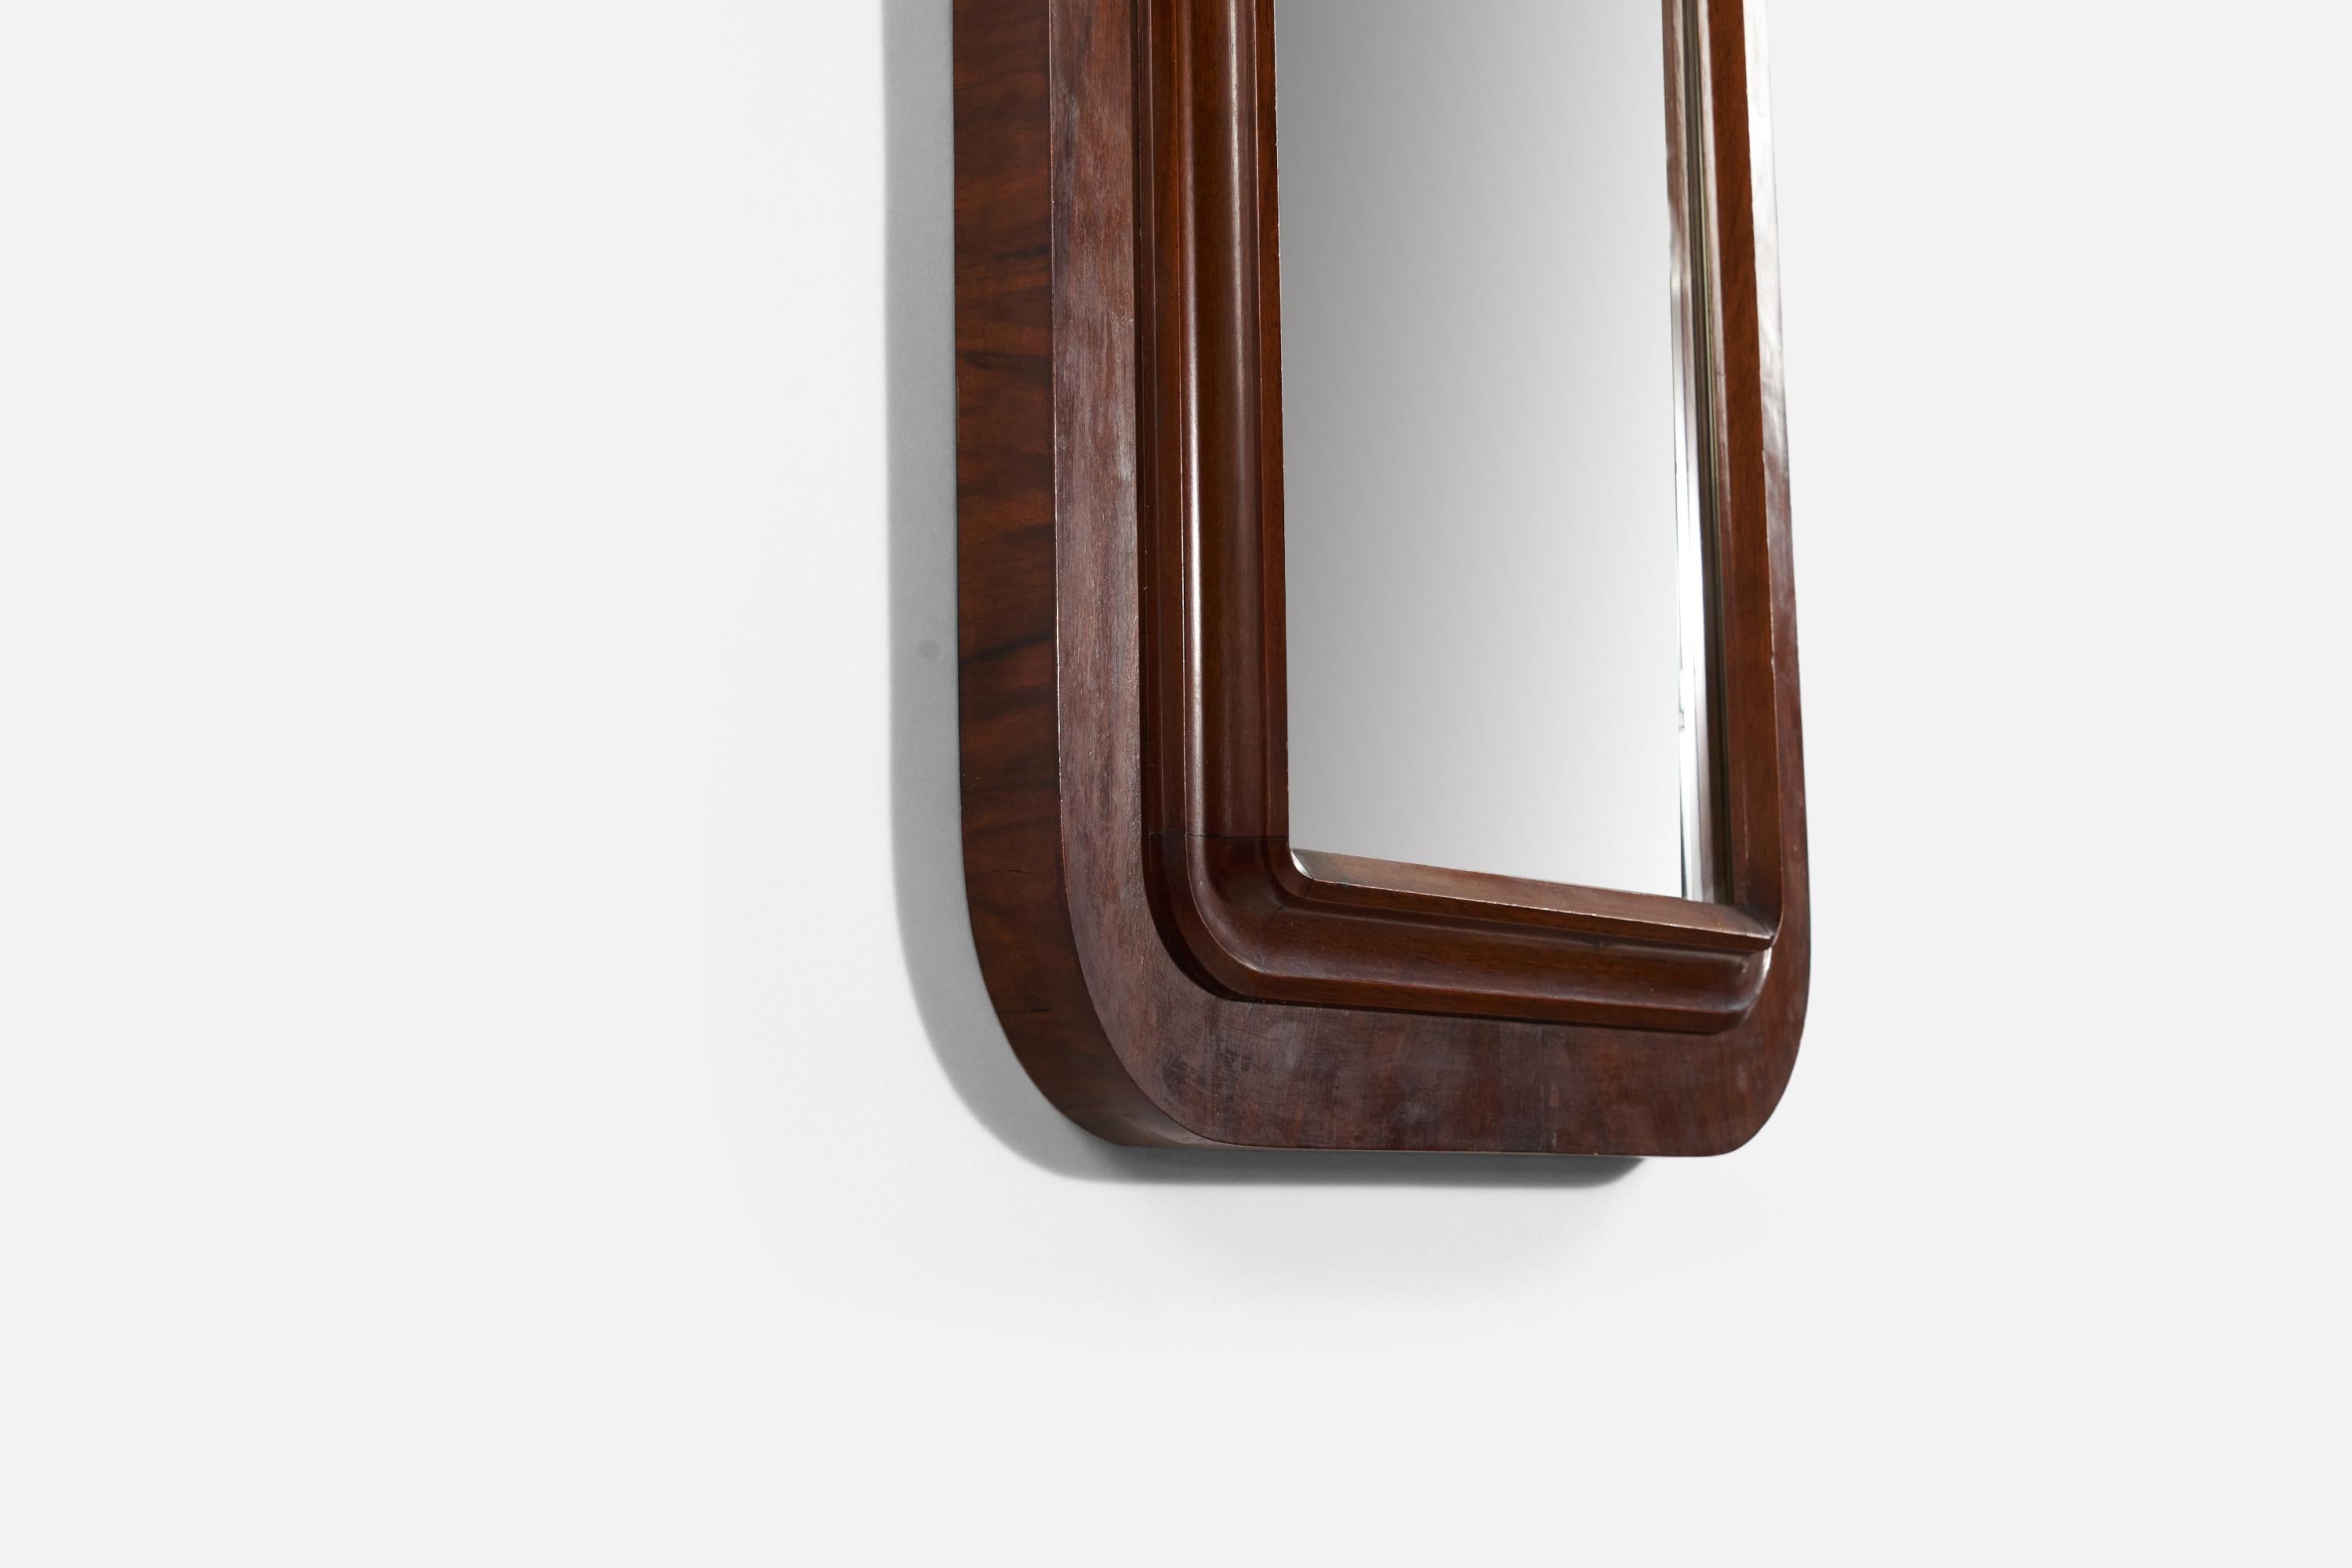 Italian Designer, Wall Mirror, Dark-Stained Wood, Italy, 1940s For Sale 1